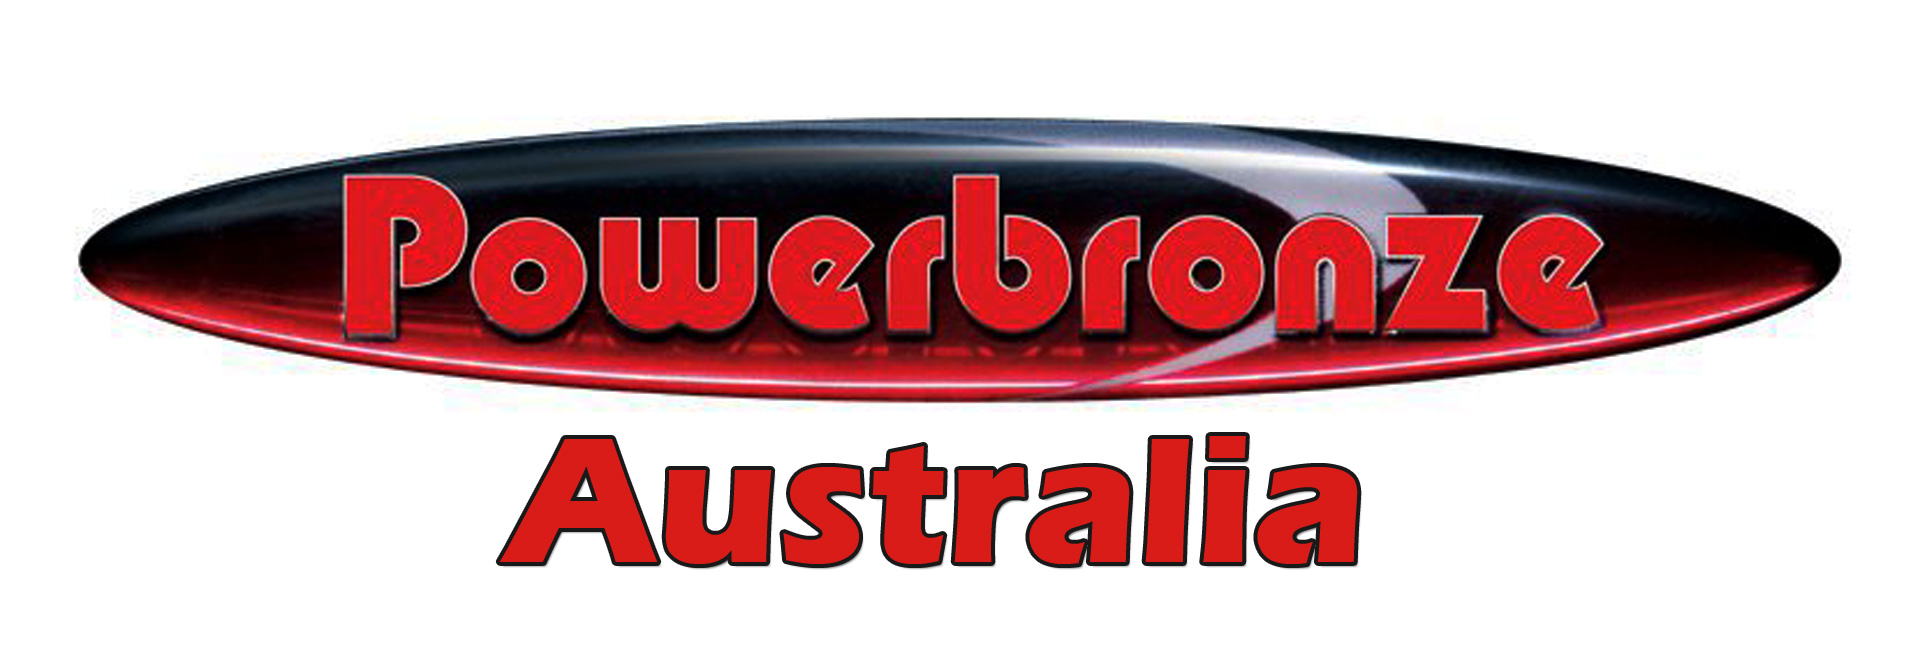 Powerbronze Australia is offering a Father's Day discount of 10% across the entire range.